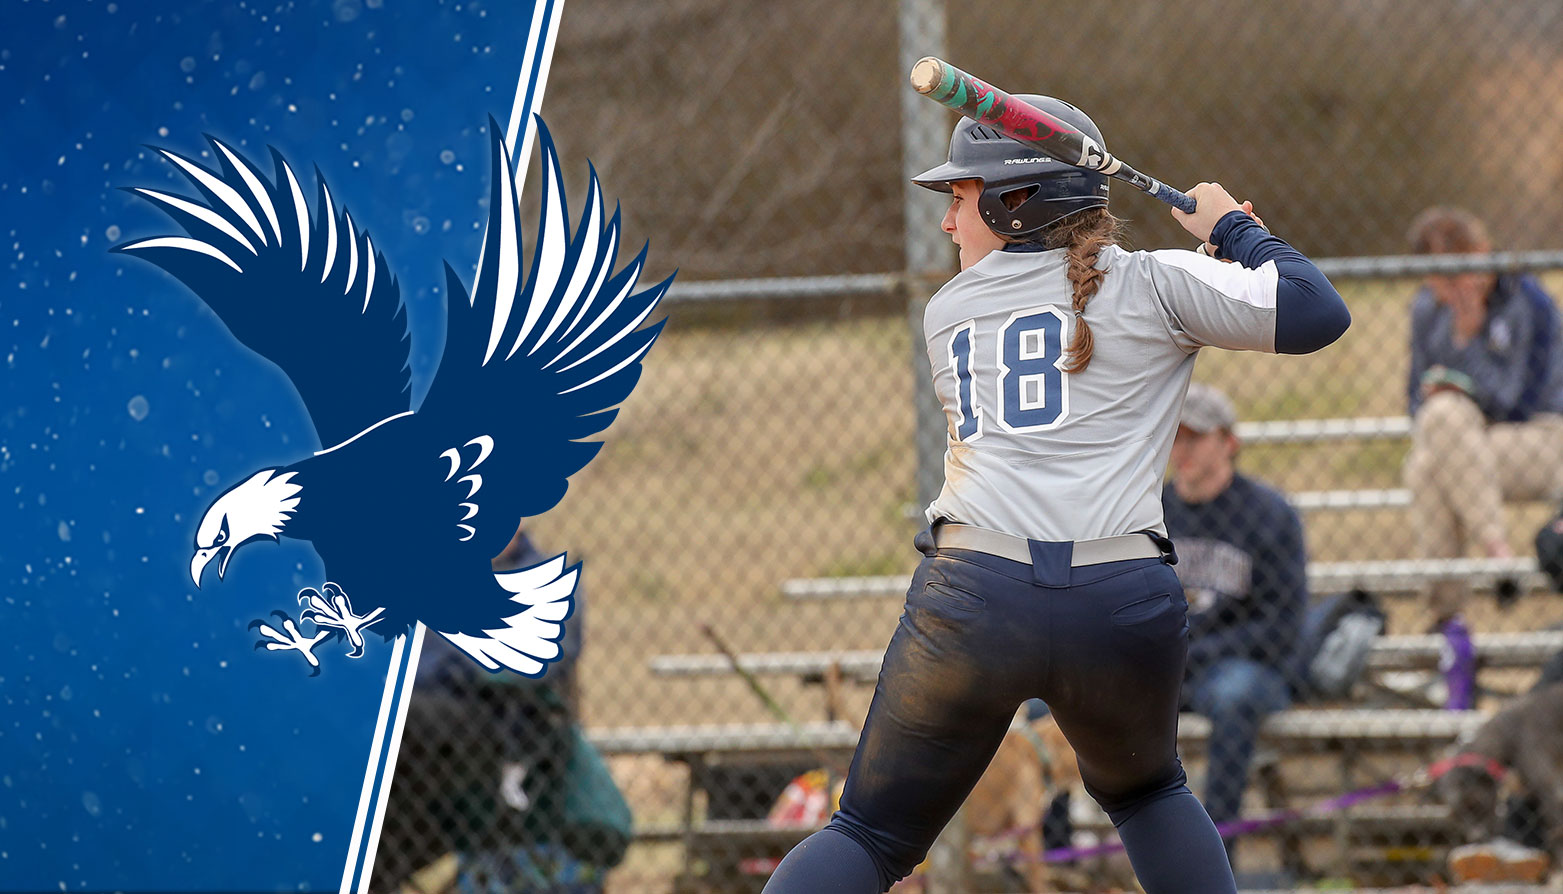 Mary Washington's Remer Records Walk-Off Winner in Game One of CAC Softball Tournament Championship Series